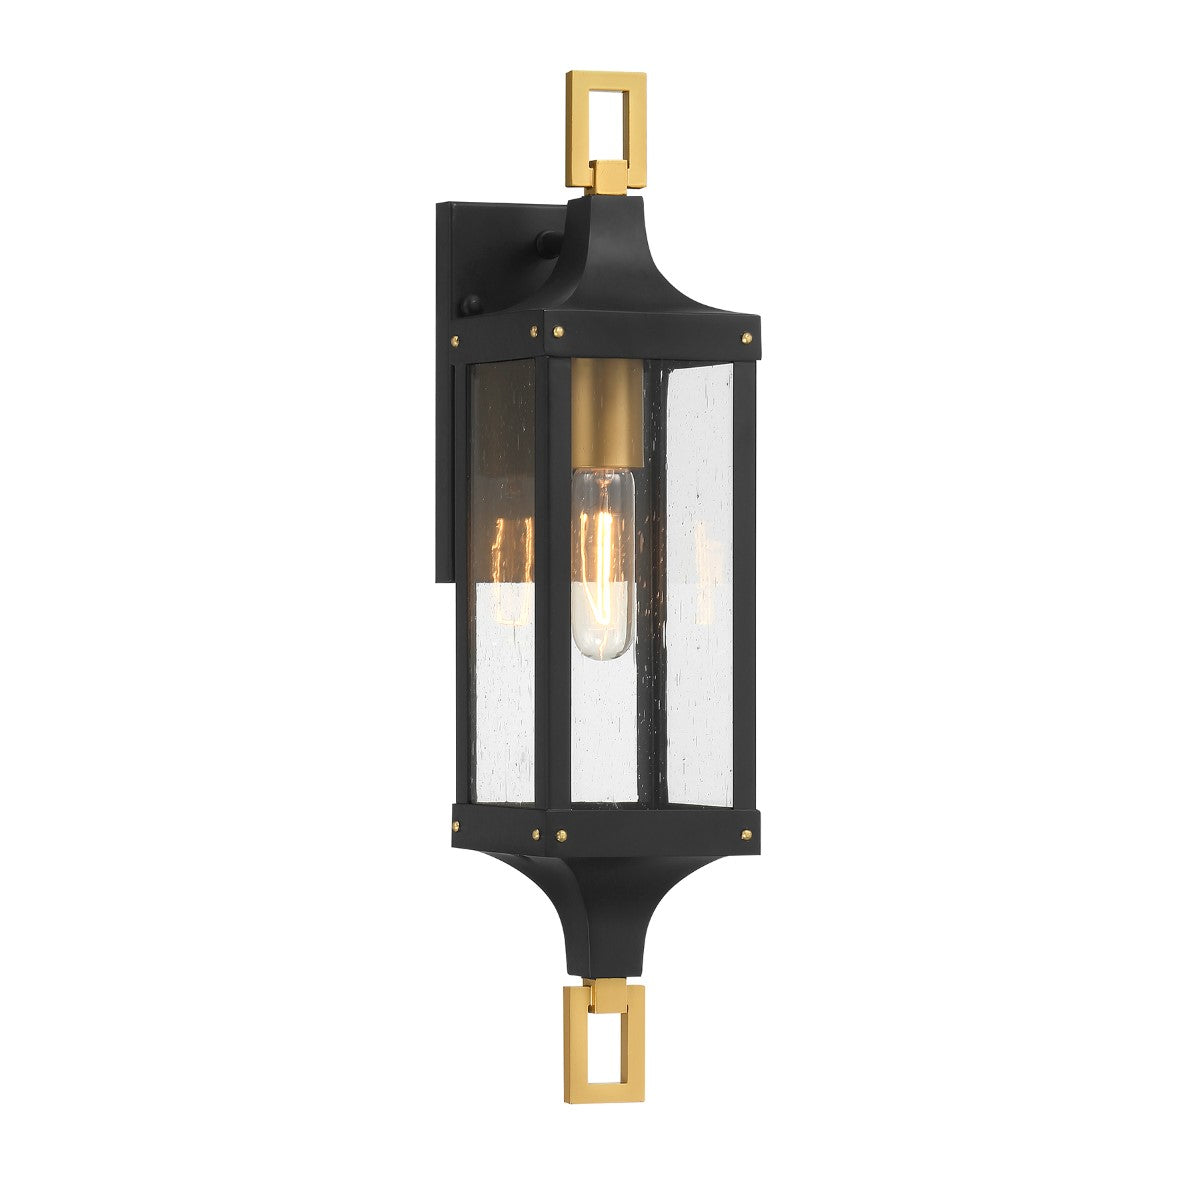 Glendale 21 in. Outdoor Wall Lantern Matte Black and Weathered Brushed Brass Finish - Bees Lighting